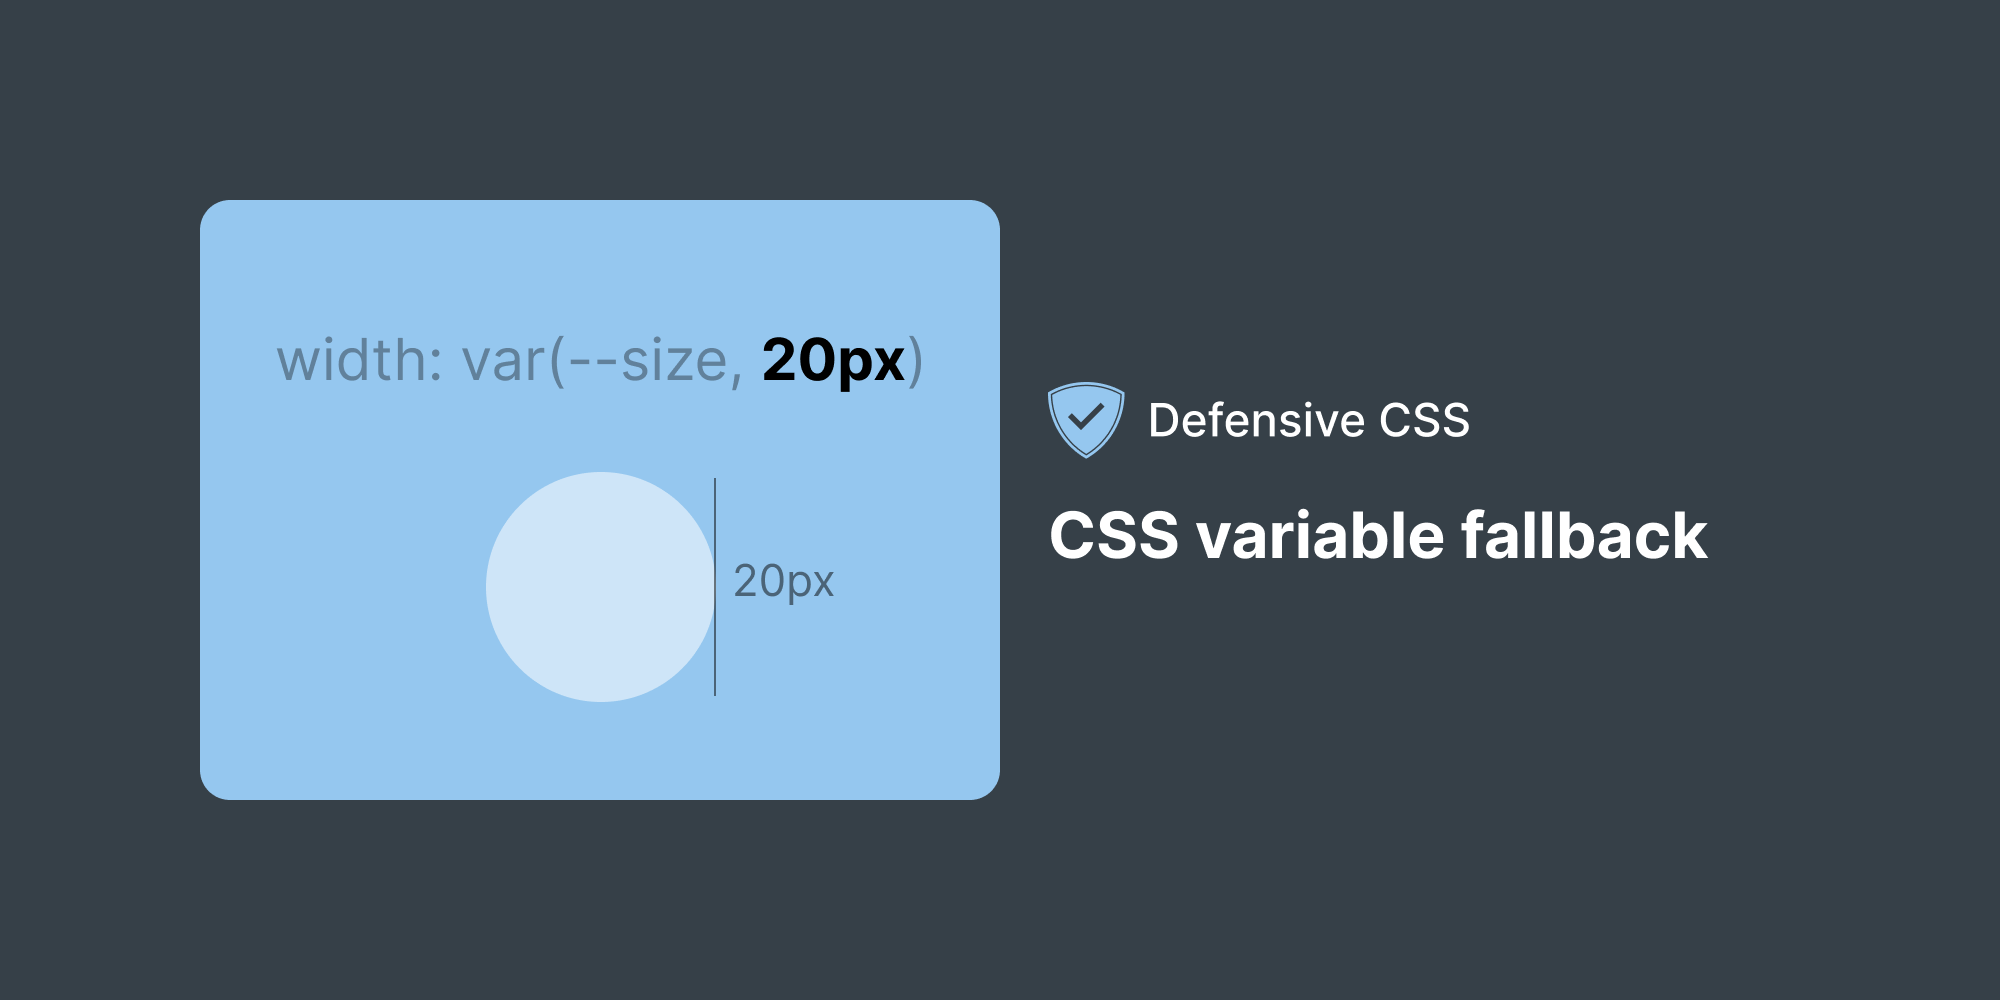 How to Create Css for a Website